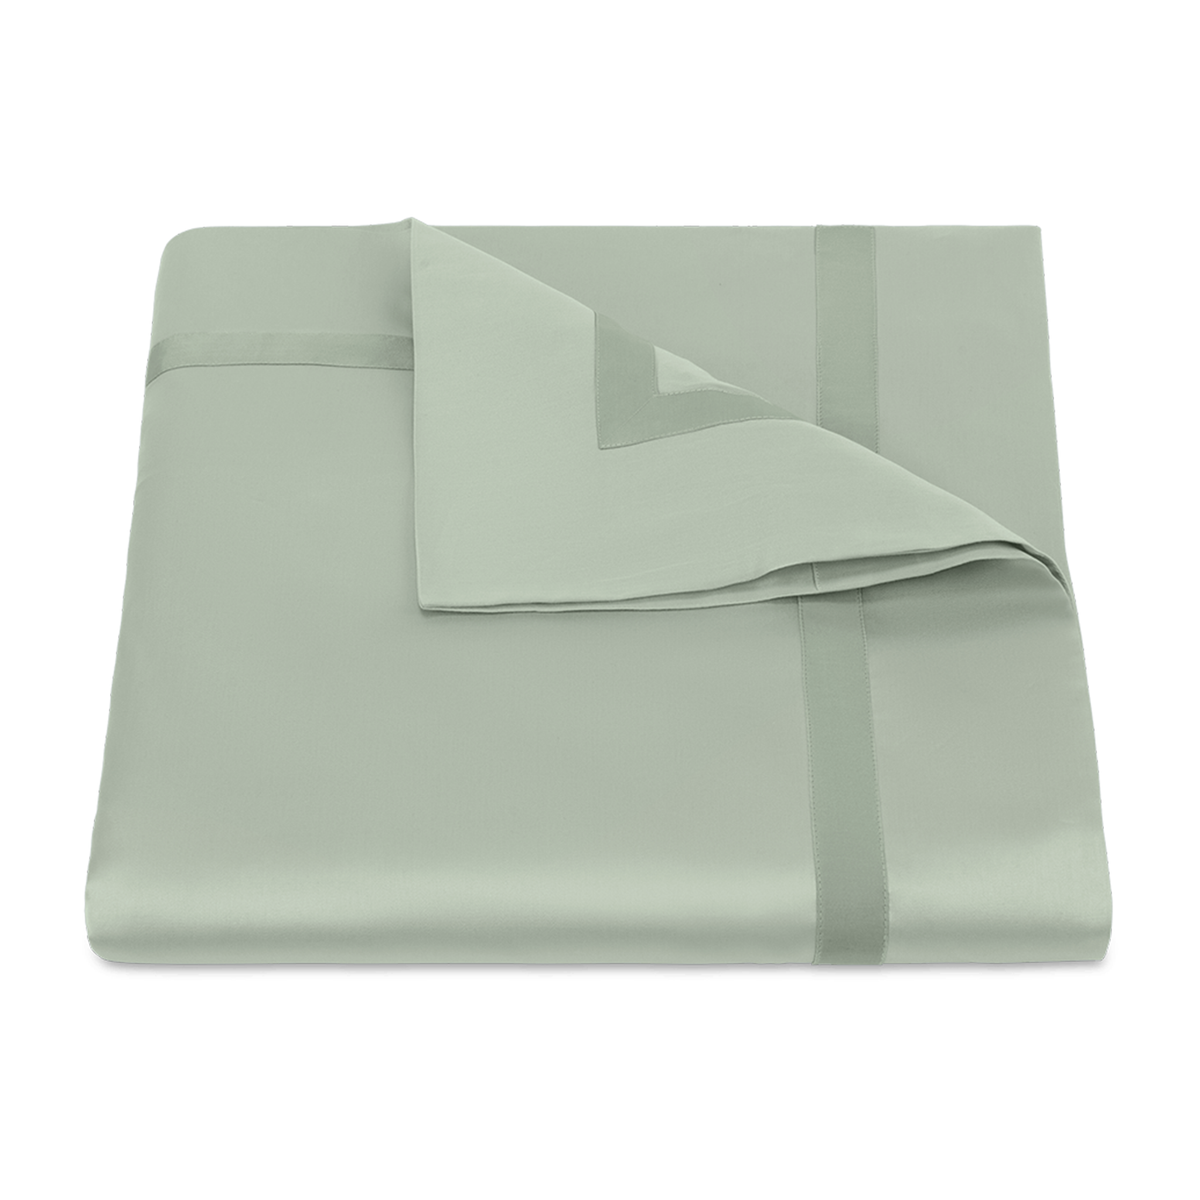 Duvet Cover of Matouk Nocturne Bedding Collection in Color Celadon